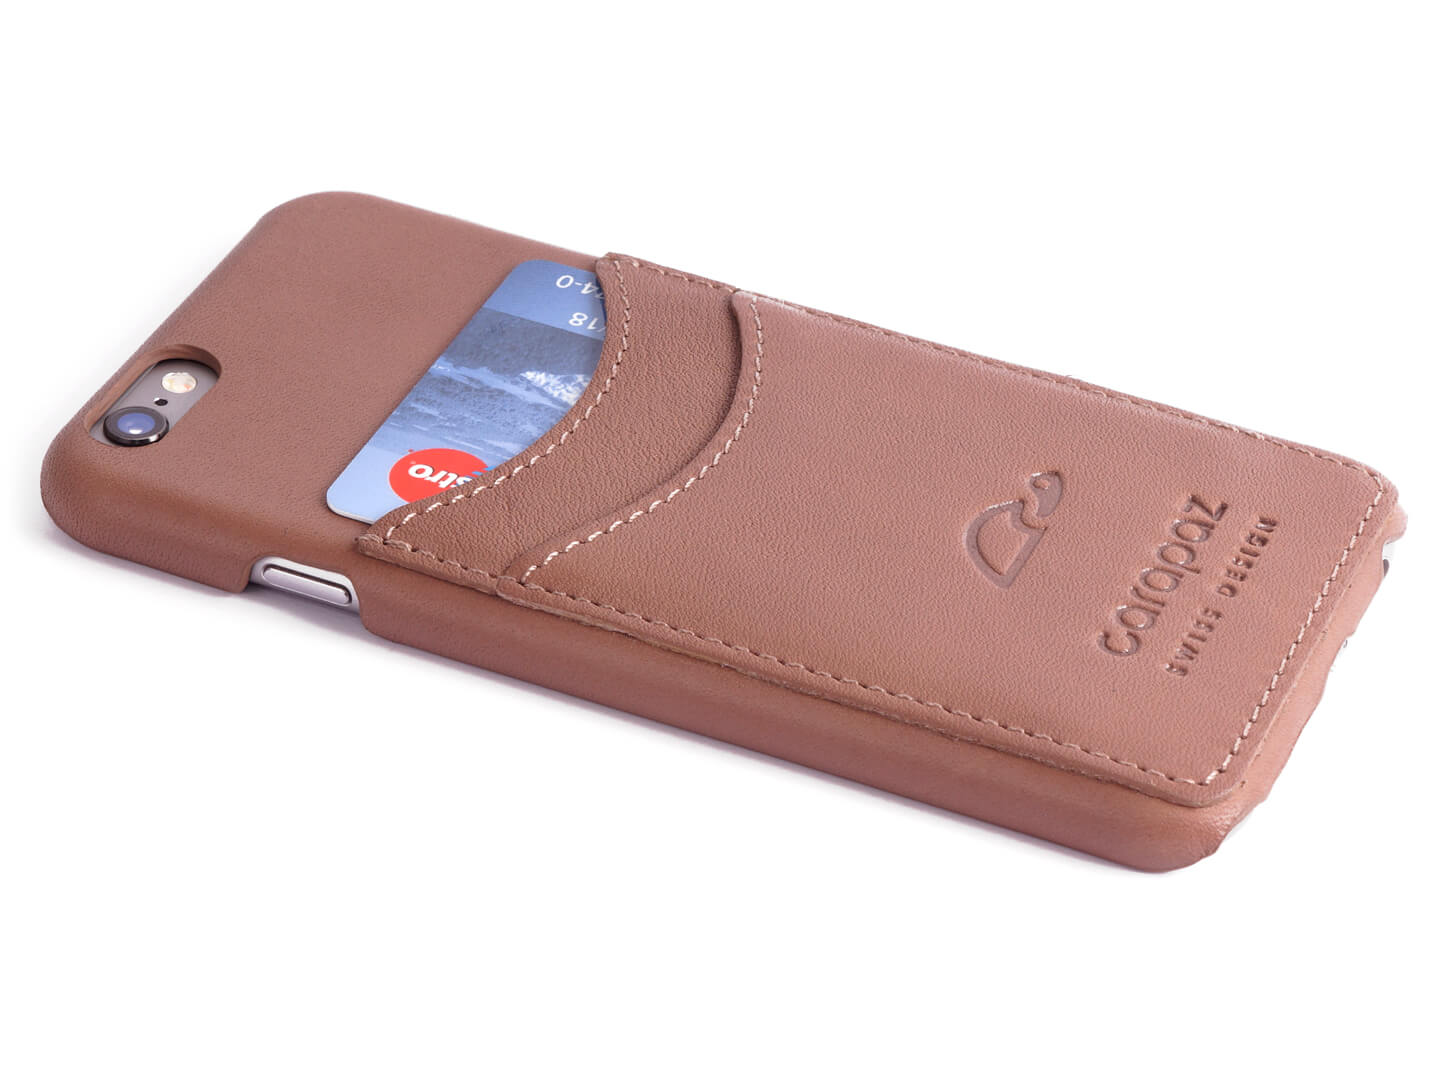 iPhone 6 Slim Case Leather - credit cards - rosybrown - Carapaz